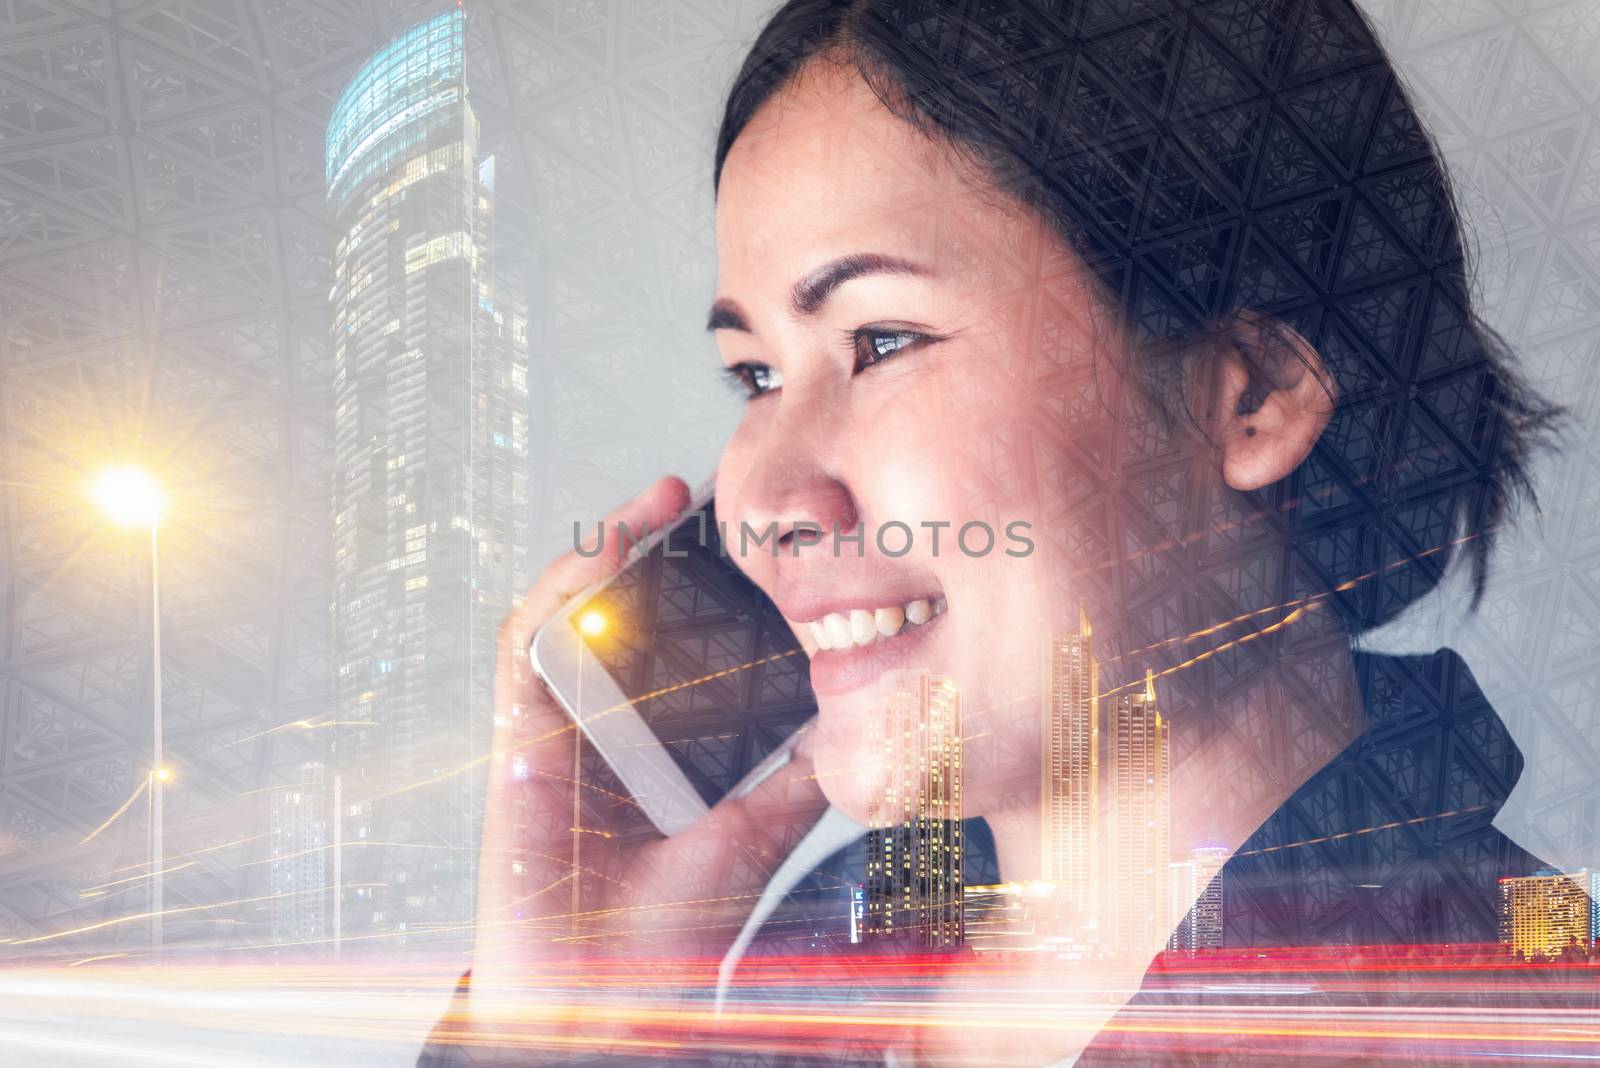 Telecommunication and Communication 5G Network Concept, Double Exposure of Business Woman is Using Smart Phone for Calling Communicated and City Urban Background. Innovative 5G Networking Mobile Phone by MahaHeang245789